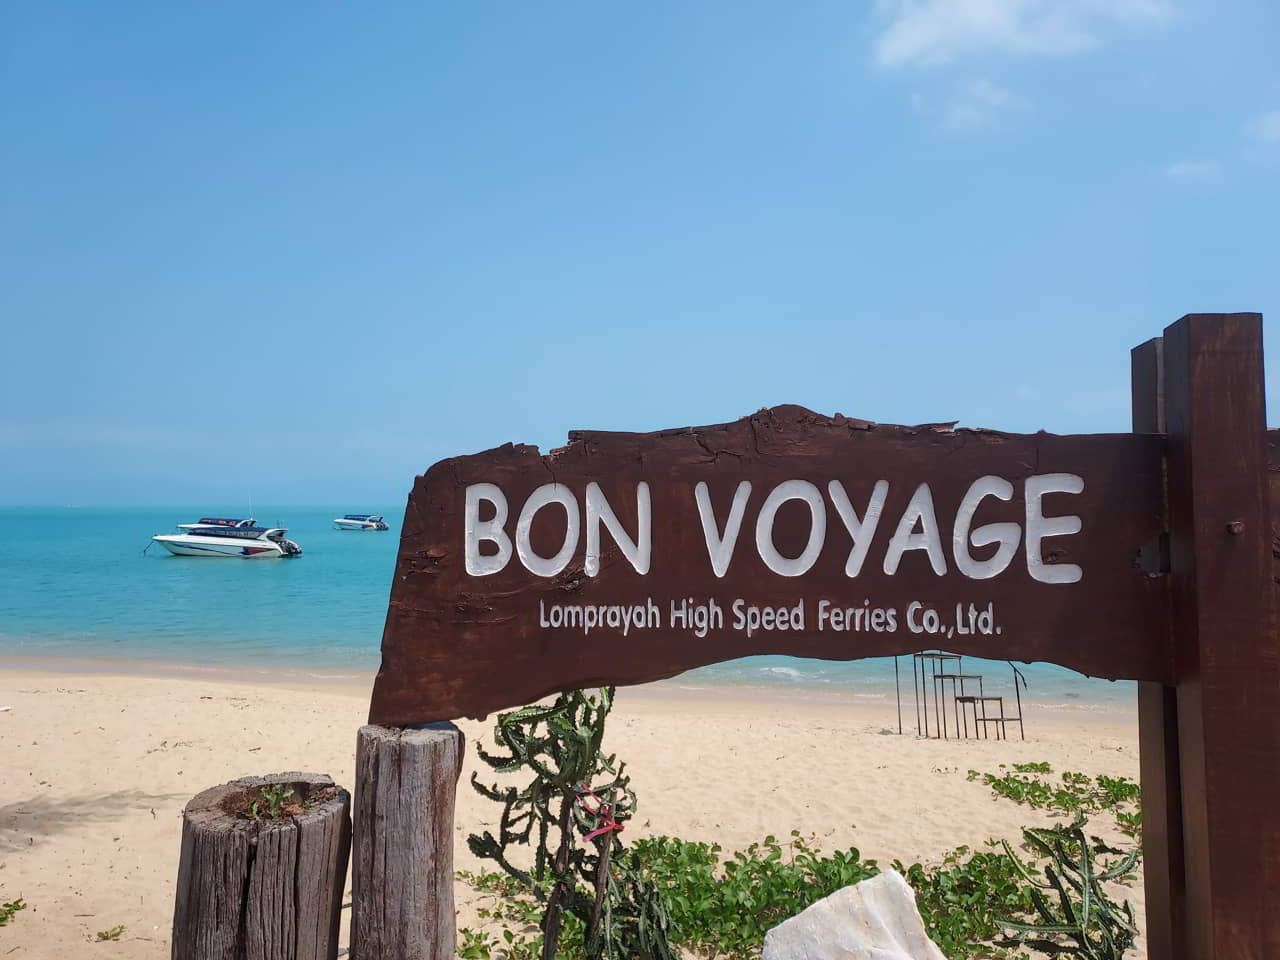 Transport Options to Koh Samui: Planes, Trains, Buses, and Ferries